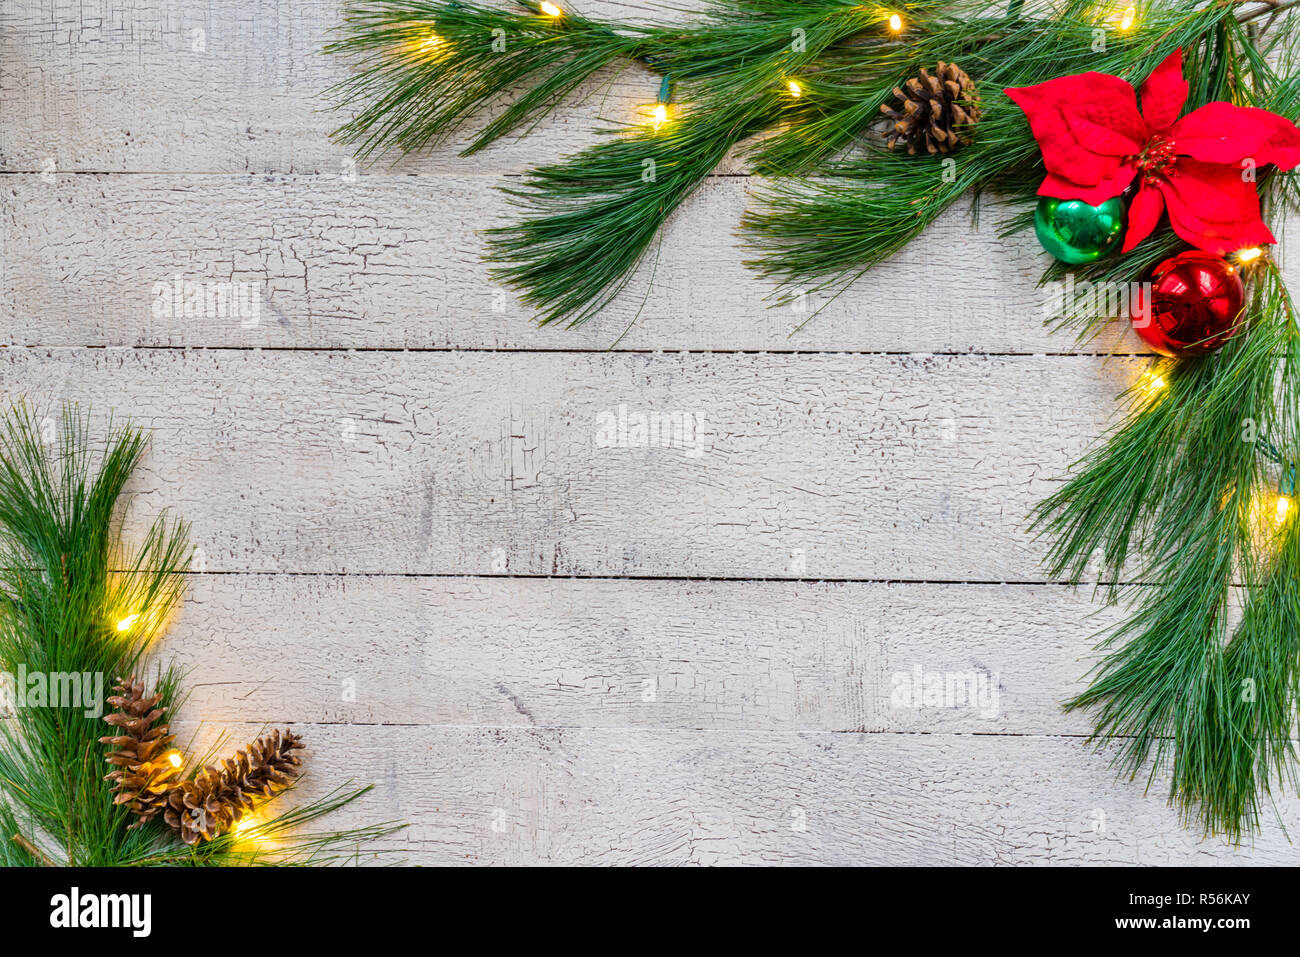 Christmas background with spruce greens, ornaments and lights on weathered white pine boards Stock Photo